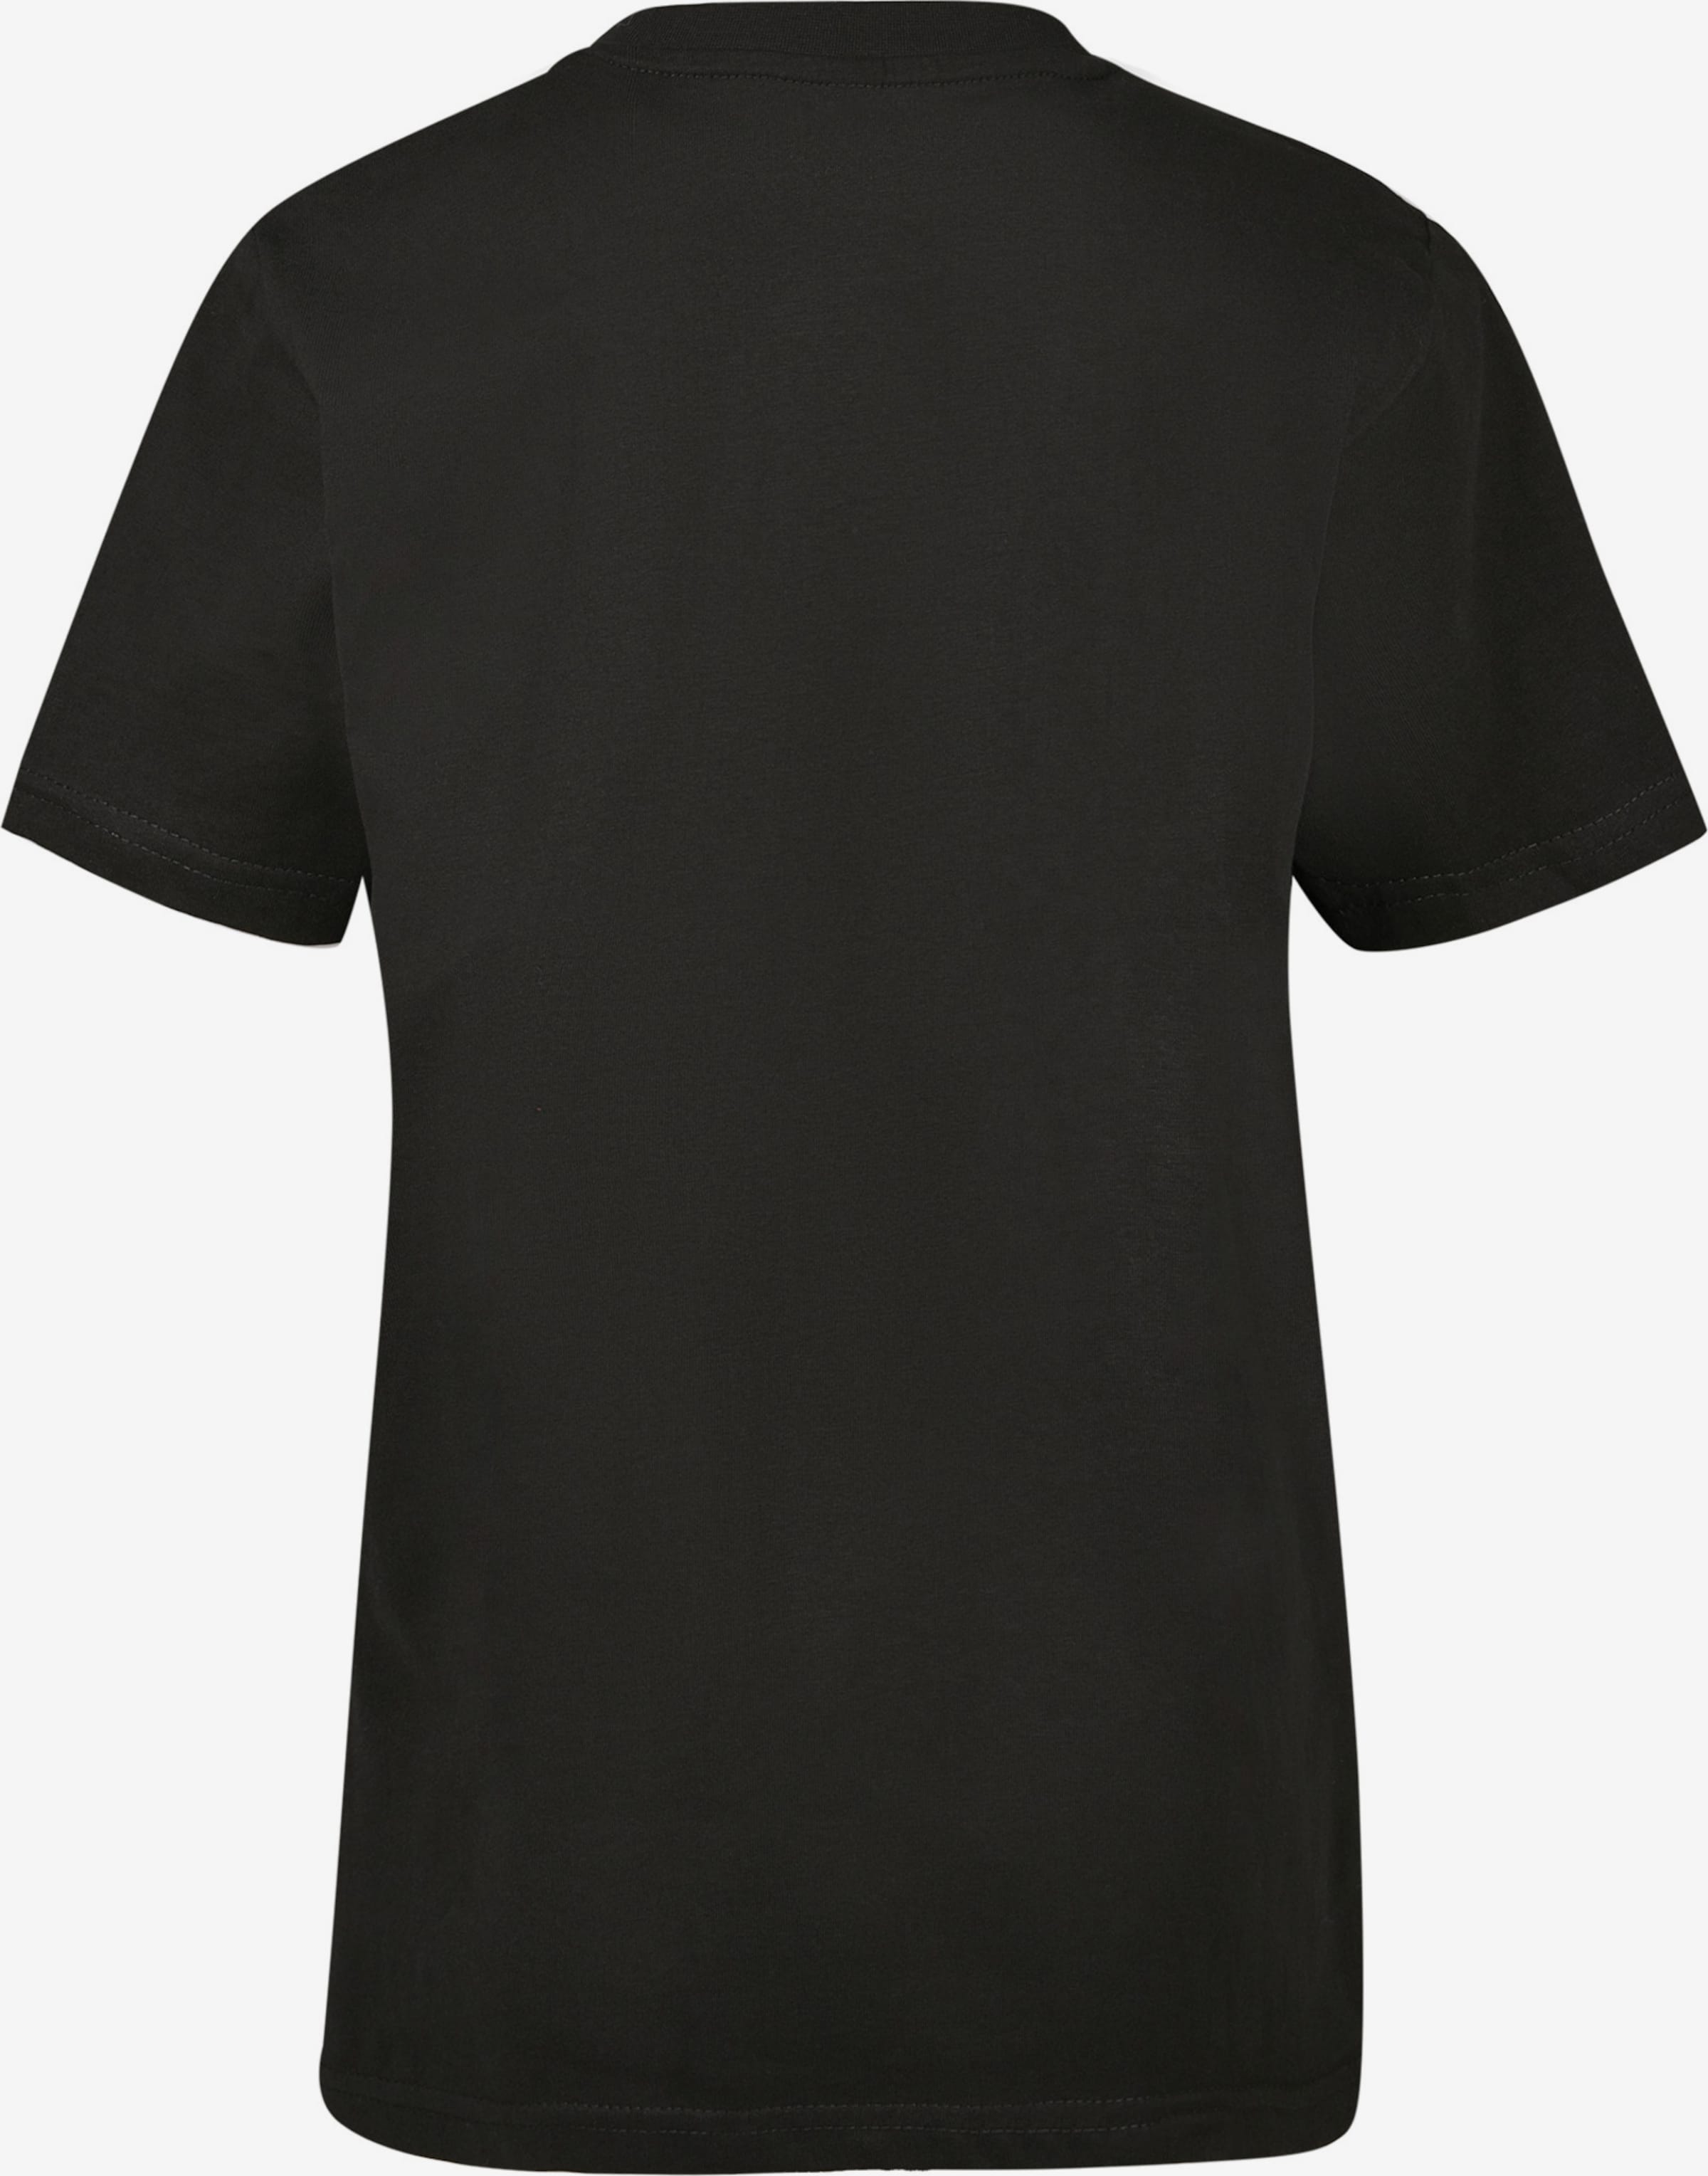 Gruppe\' Black Shirt | ABOUT in F4NT4STIC YOU \'Frozen 2